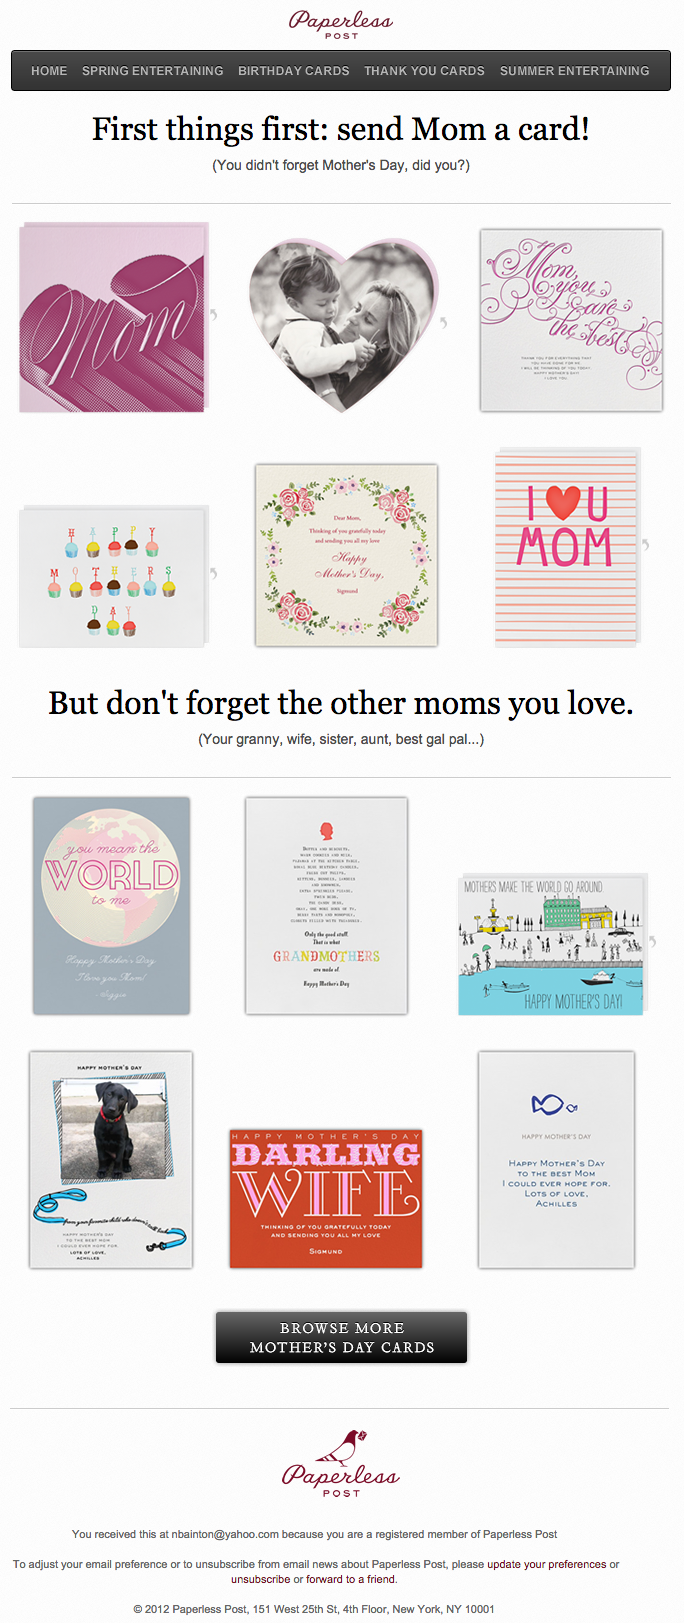 Email marketing campaign on Mother's Day by Paperless Post